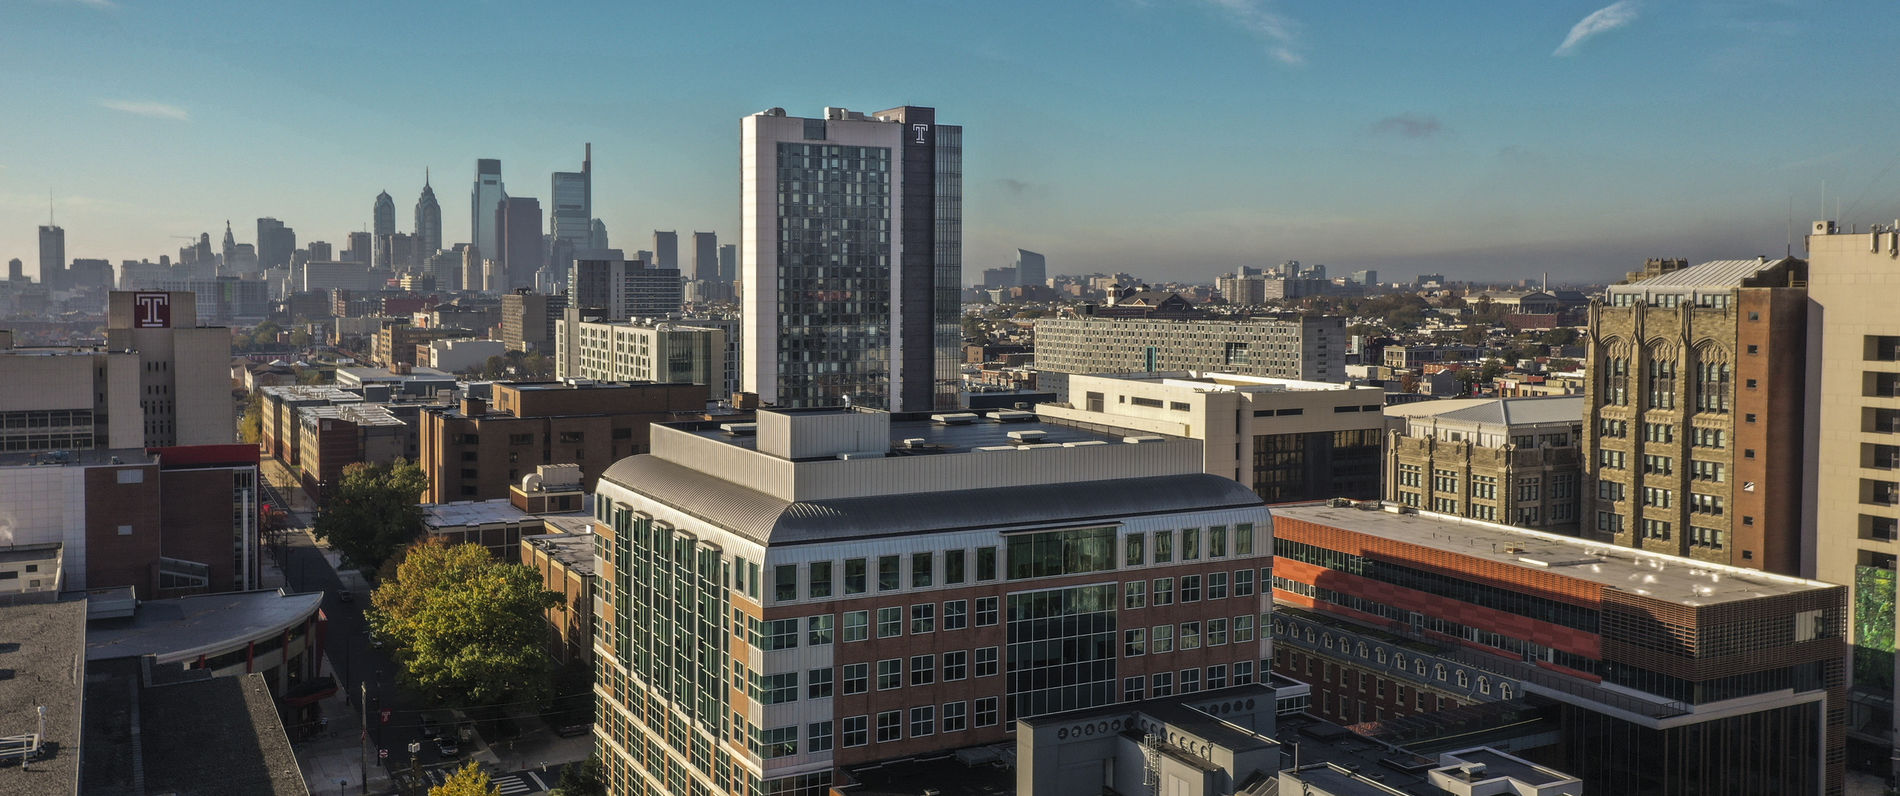 Looking over the tops of buildings at Temple University's Morgan Hall with the Philadelphia skyline visible in the background